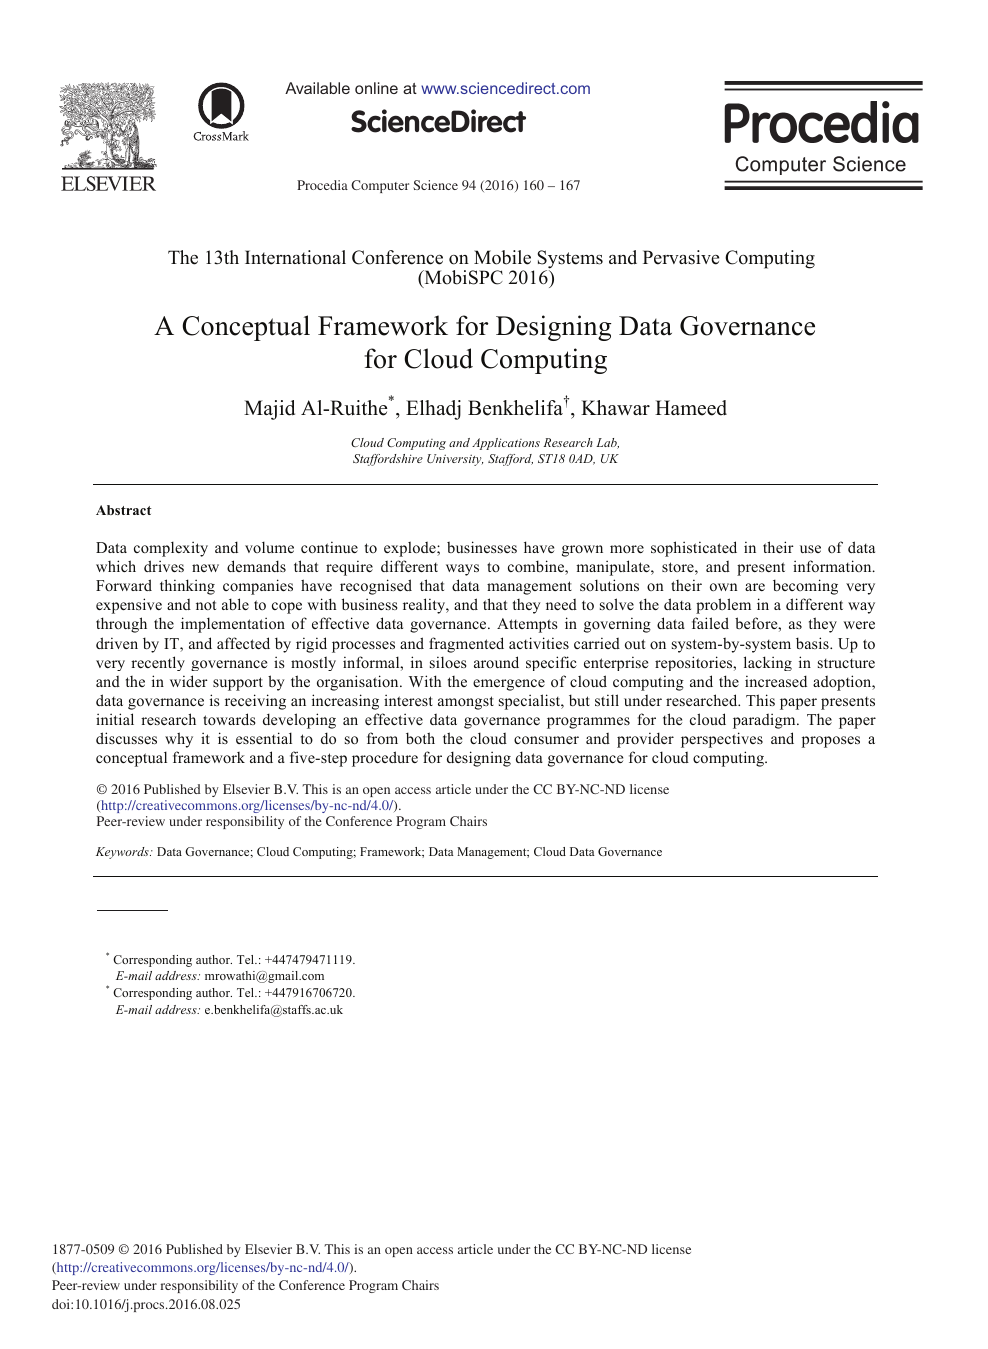 A Conceptual Framework For Designing Data Governance For Cloud Computing Topic Of Research Paper In Earth And Related Environmental Sciences Download Scholarly Article Pdf And Read For Free On Cyberleninka Open